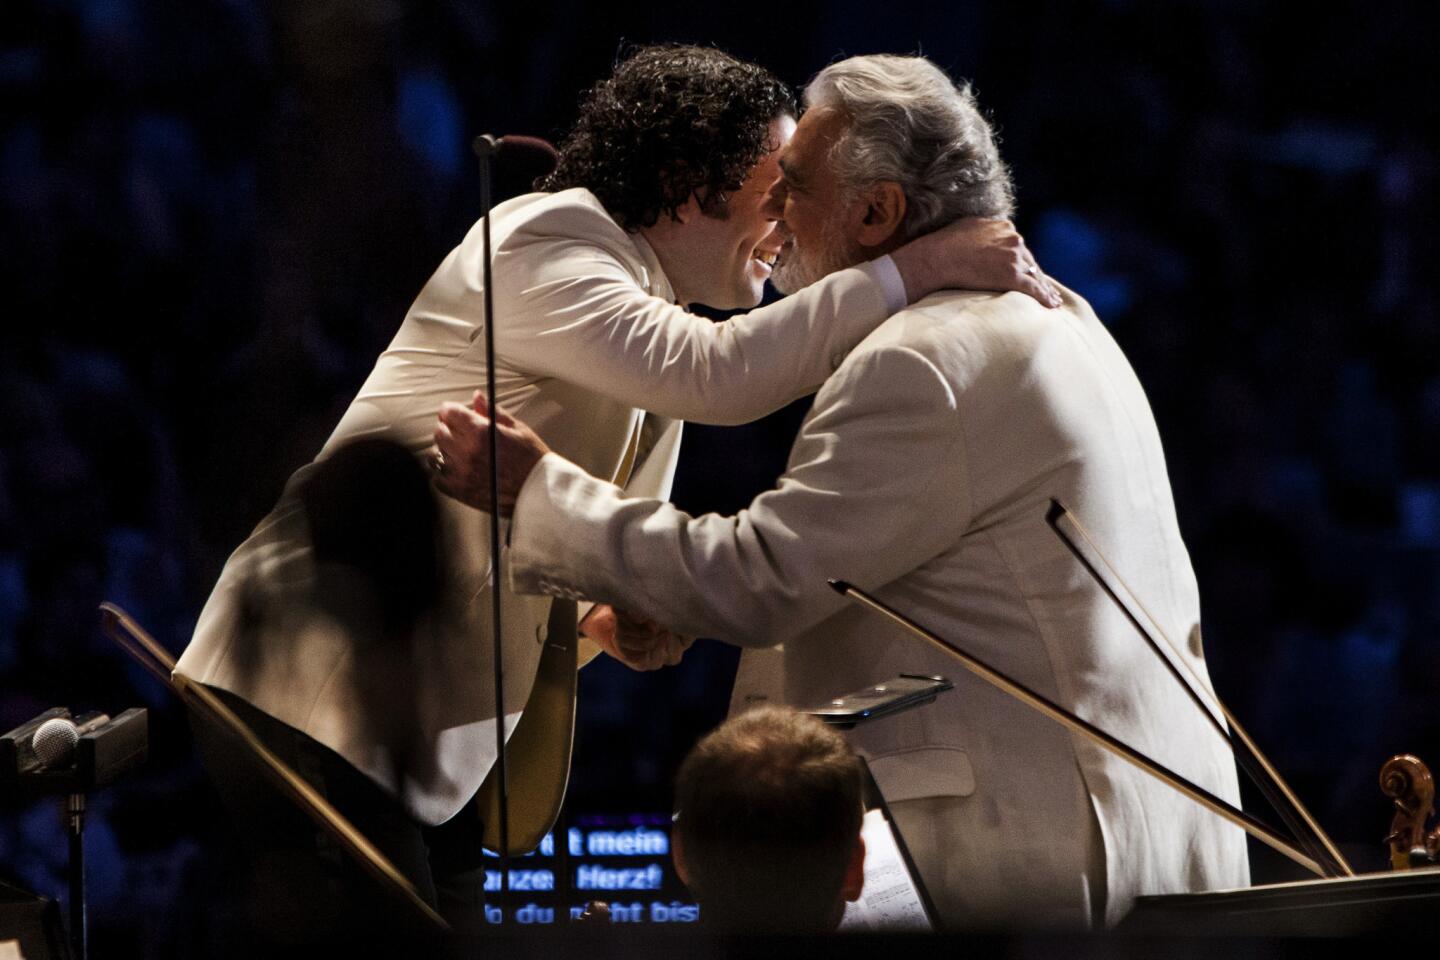 Arts and culture in pictures by The Times | Gustavo Dudamel and Placido Domingo